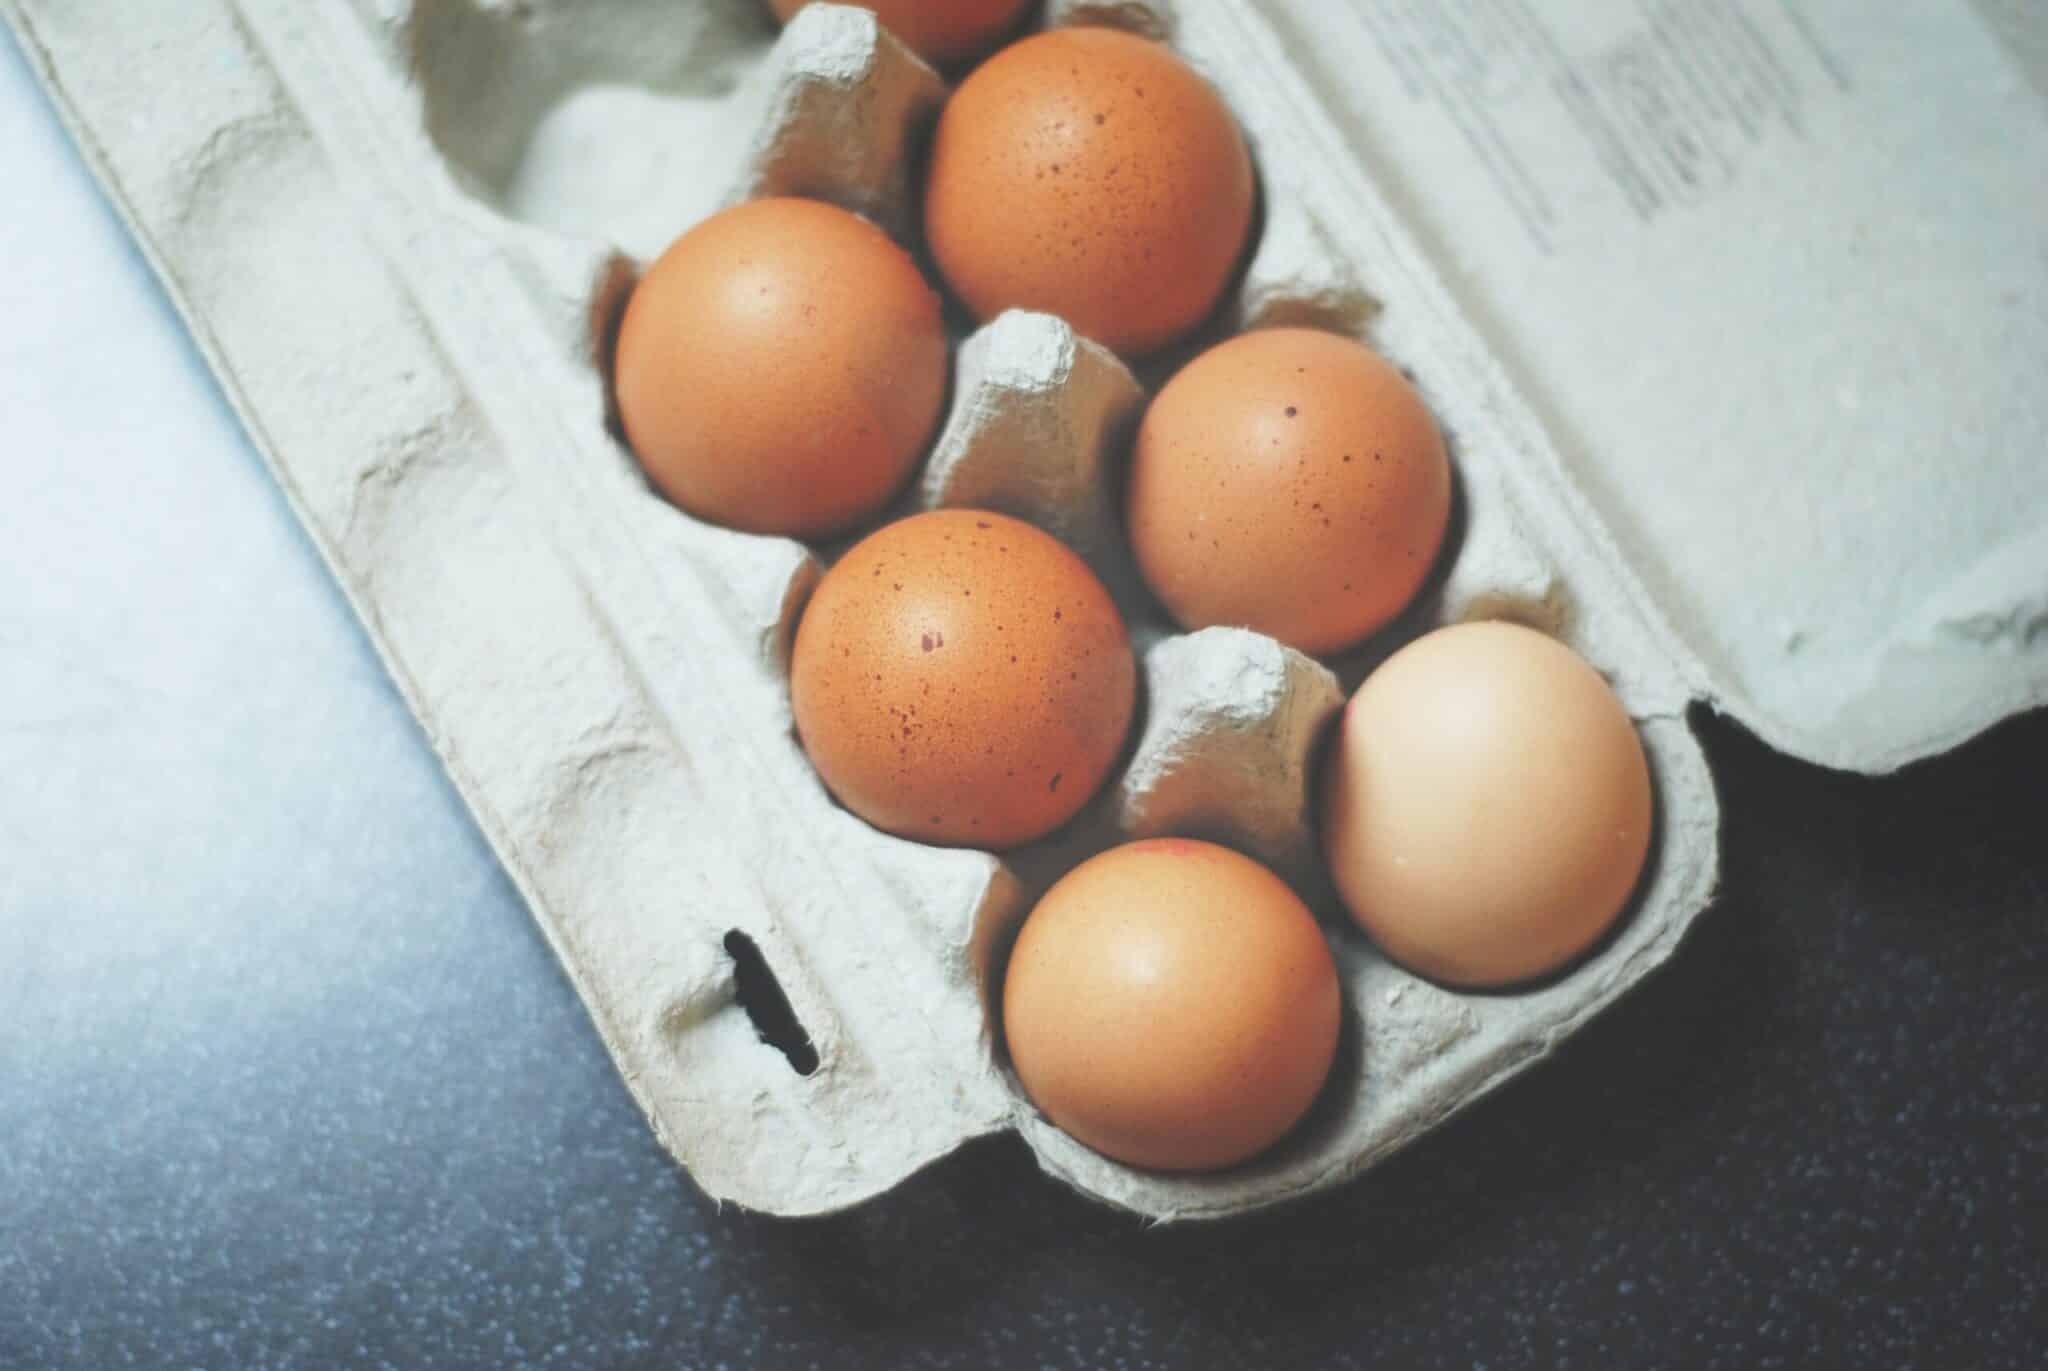 Eggs and Cholesterol - Does it Matter?